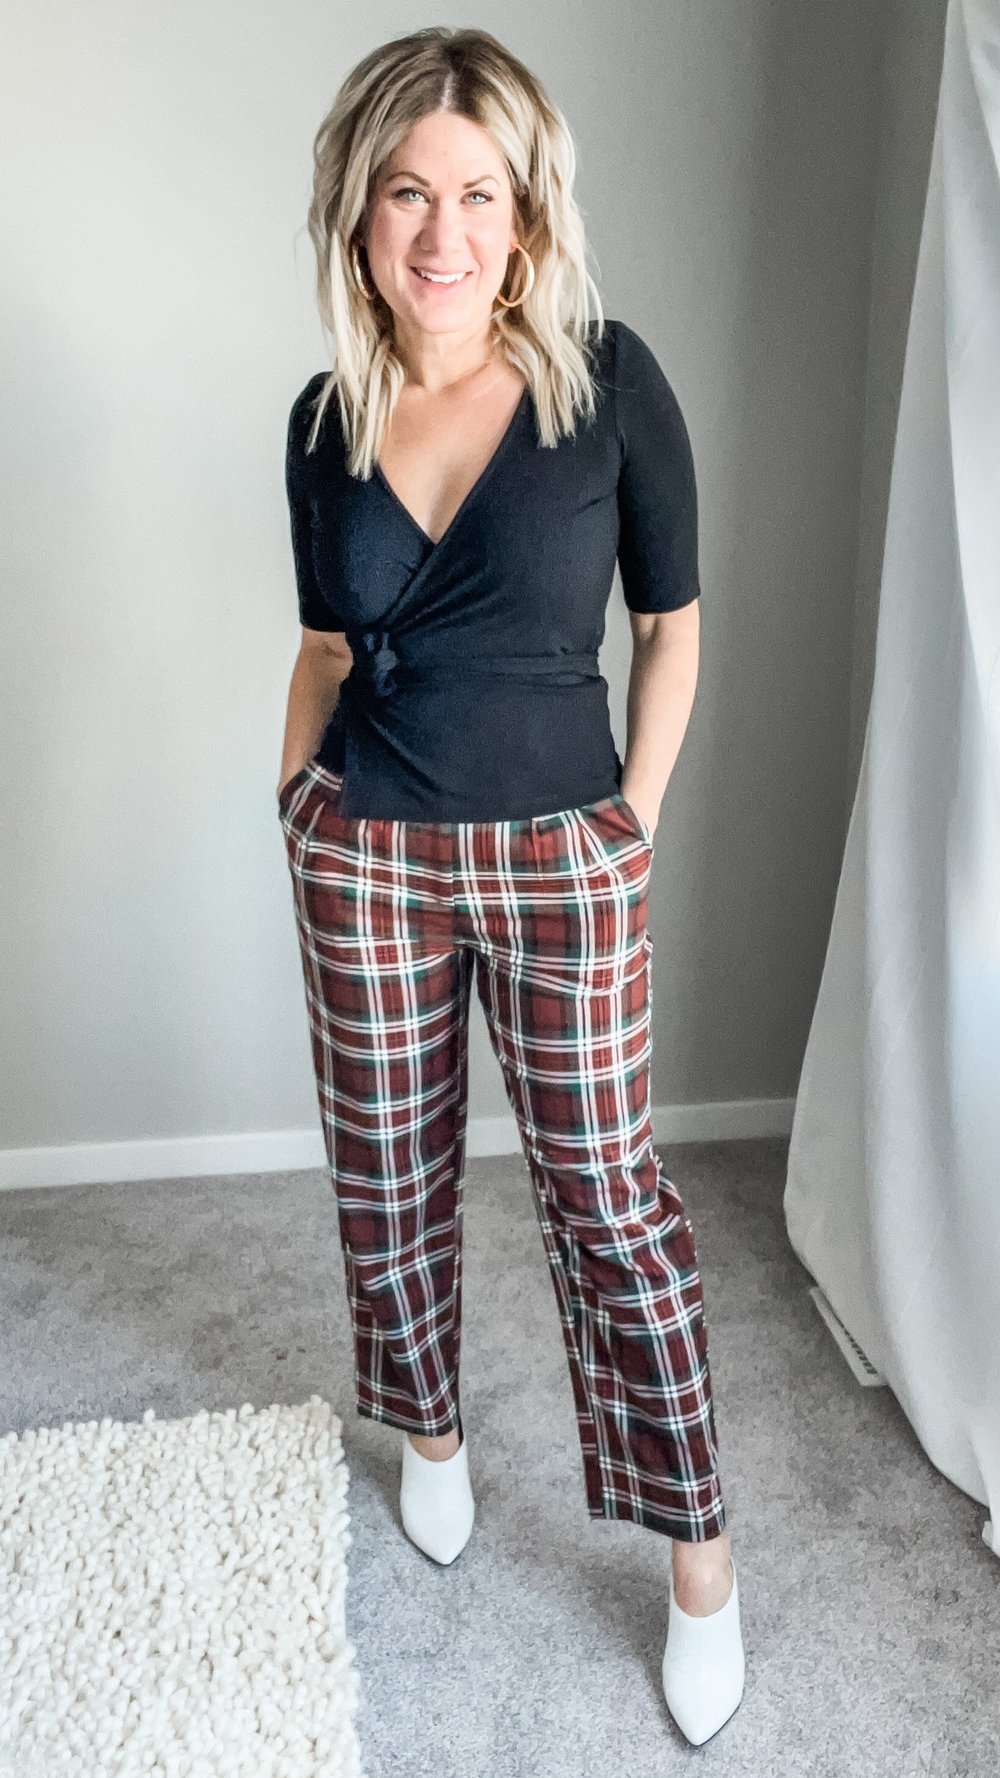 MAKE A STATEMENT WITH A WRAP TOP &amp; PLAID PANTS